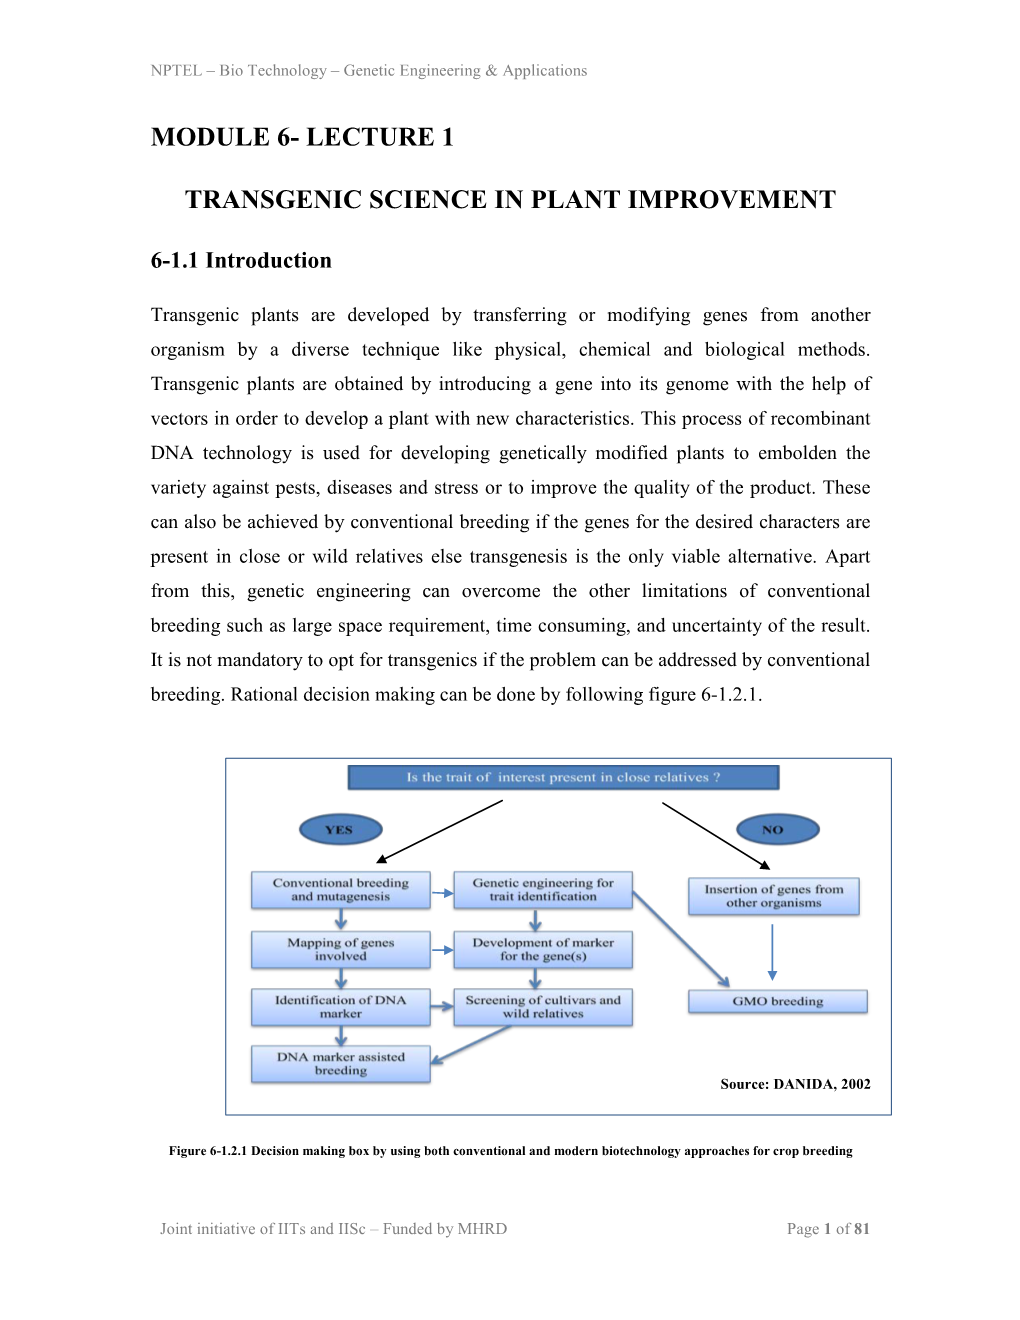 Lecture 1 Transgenic Science in Plant Improvement